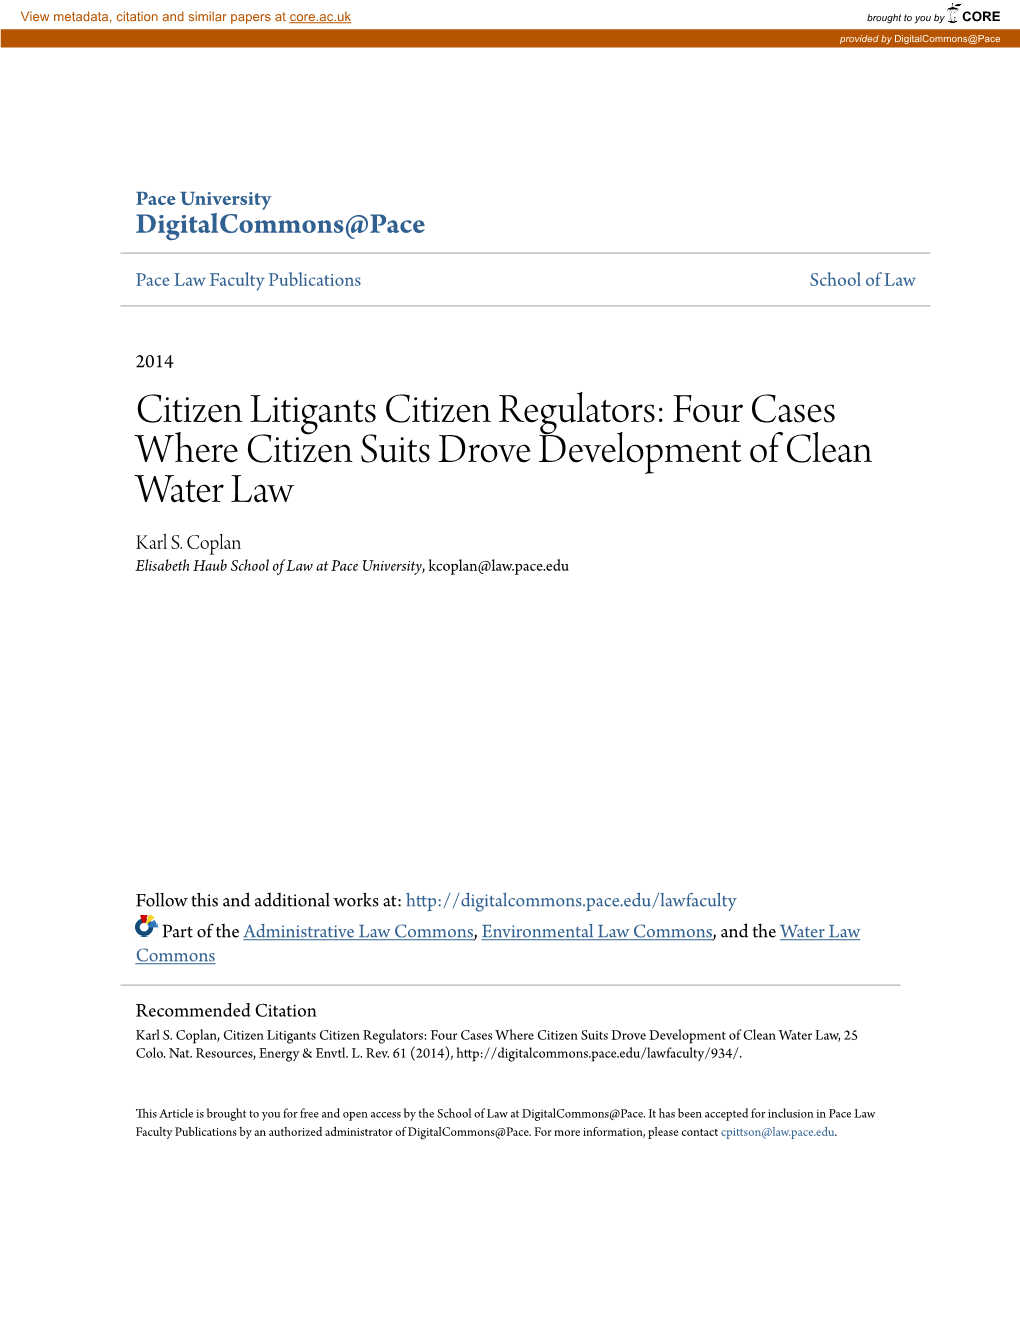 Four Cases Where Citizen Suits Drove Development of Clean Water Law Karl S